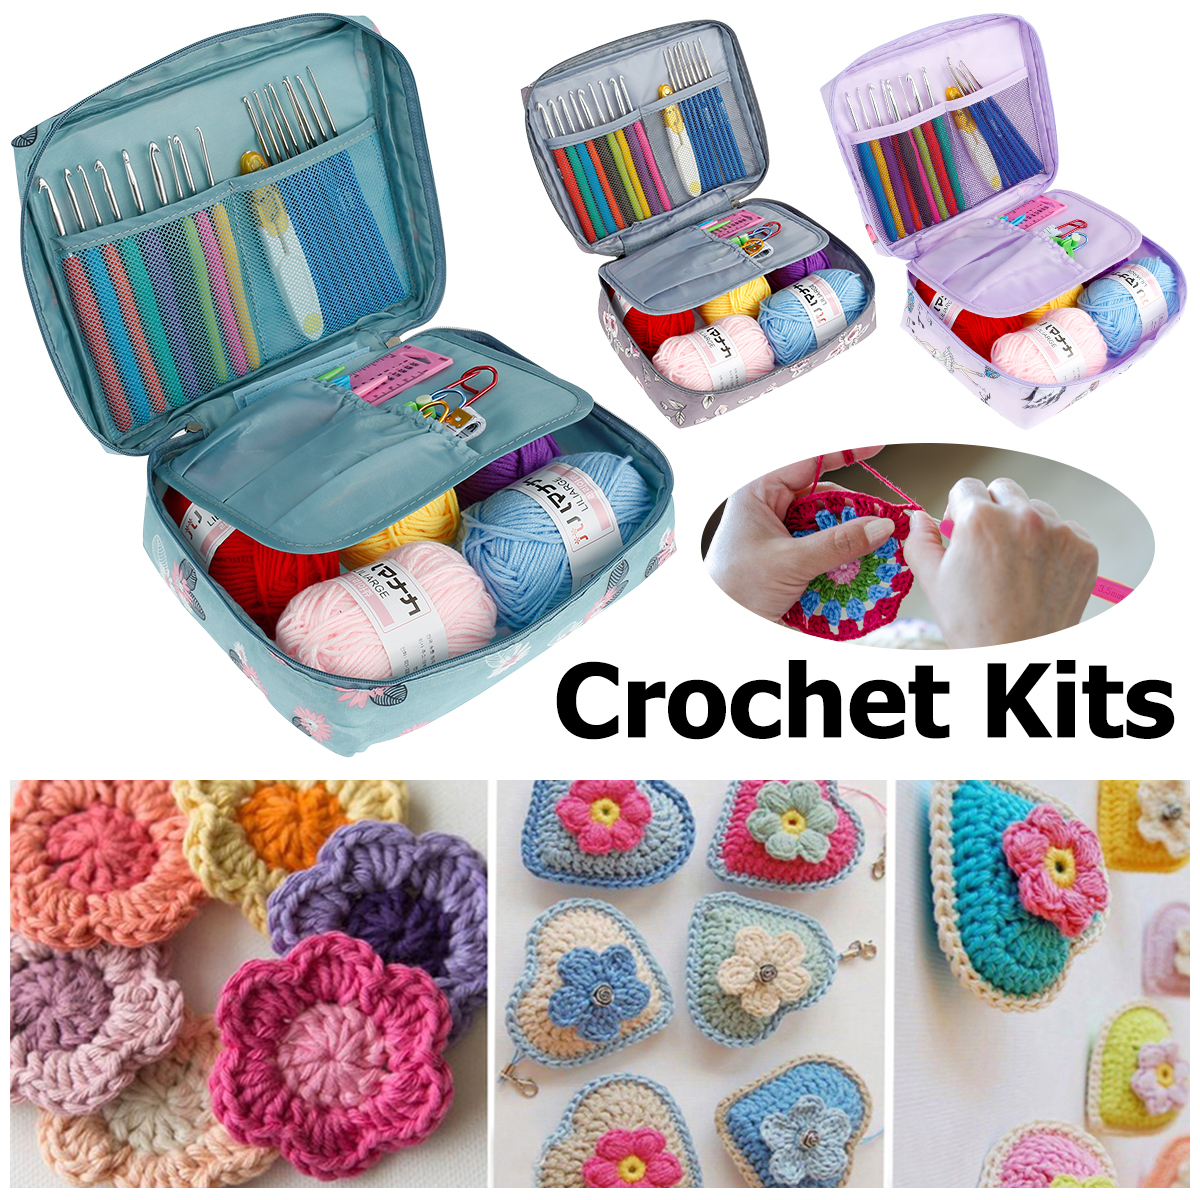 Toorise Crochet Kits for Beginners,Colorful Crochet Hook Set with